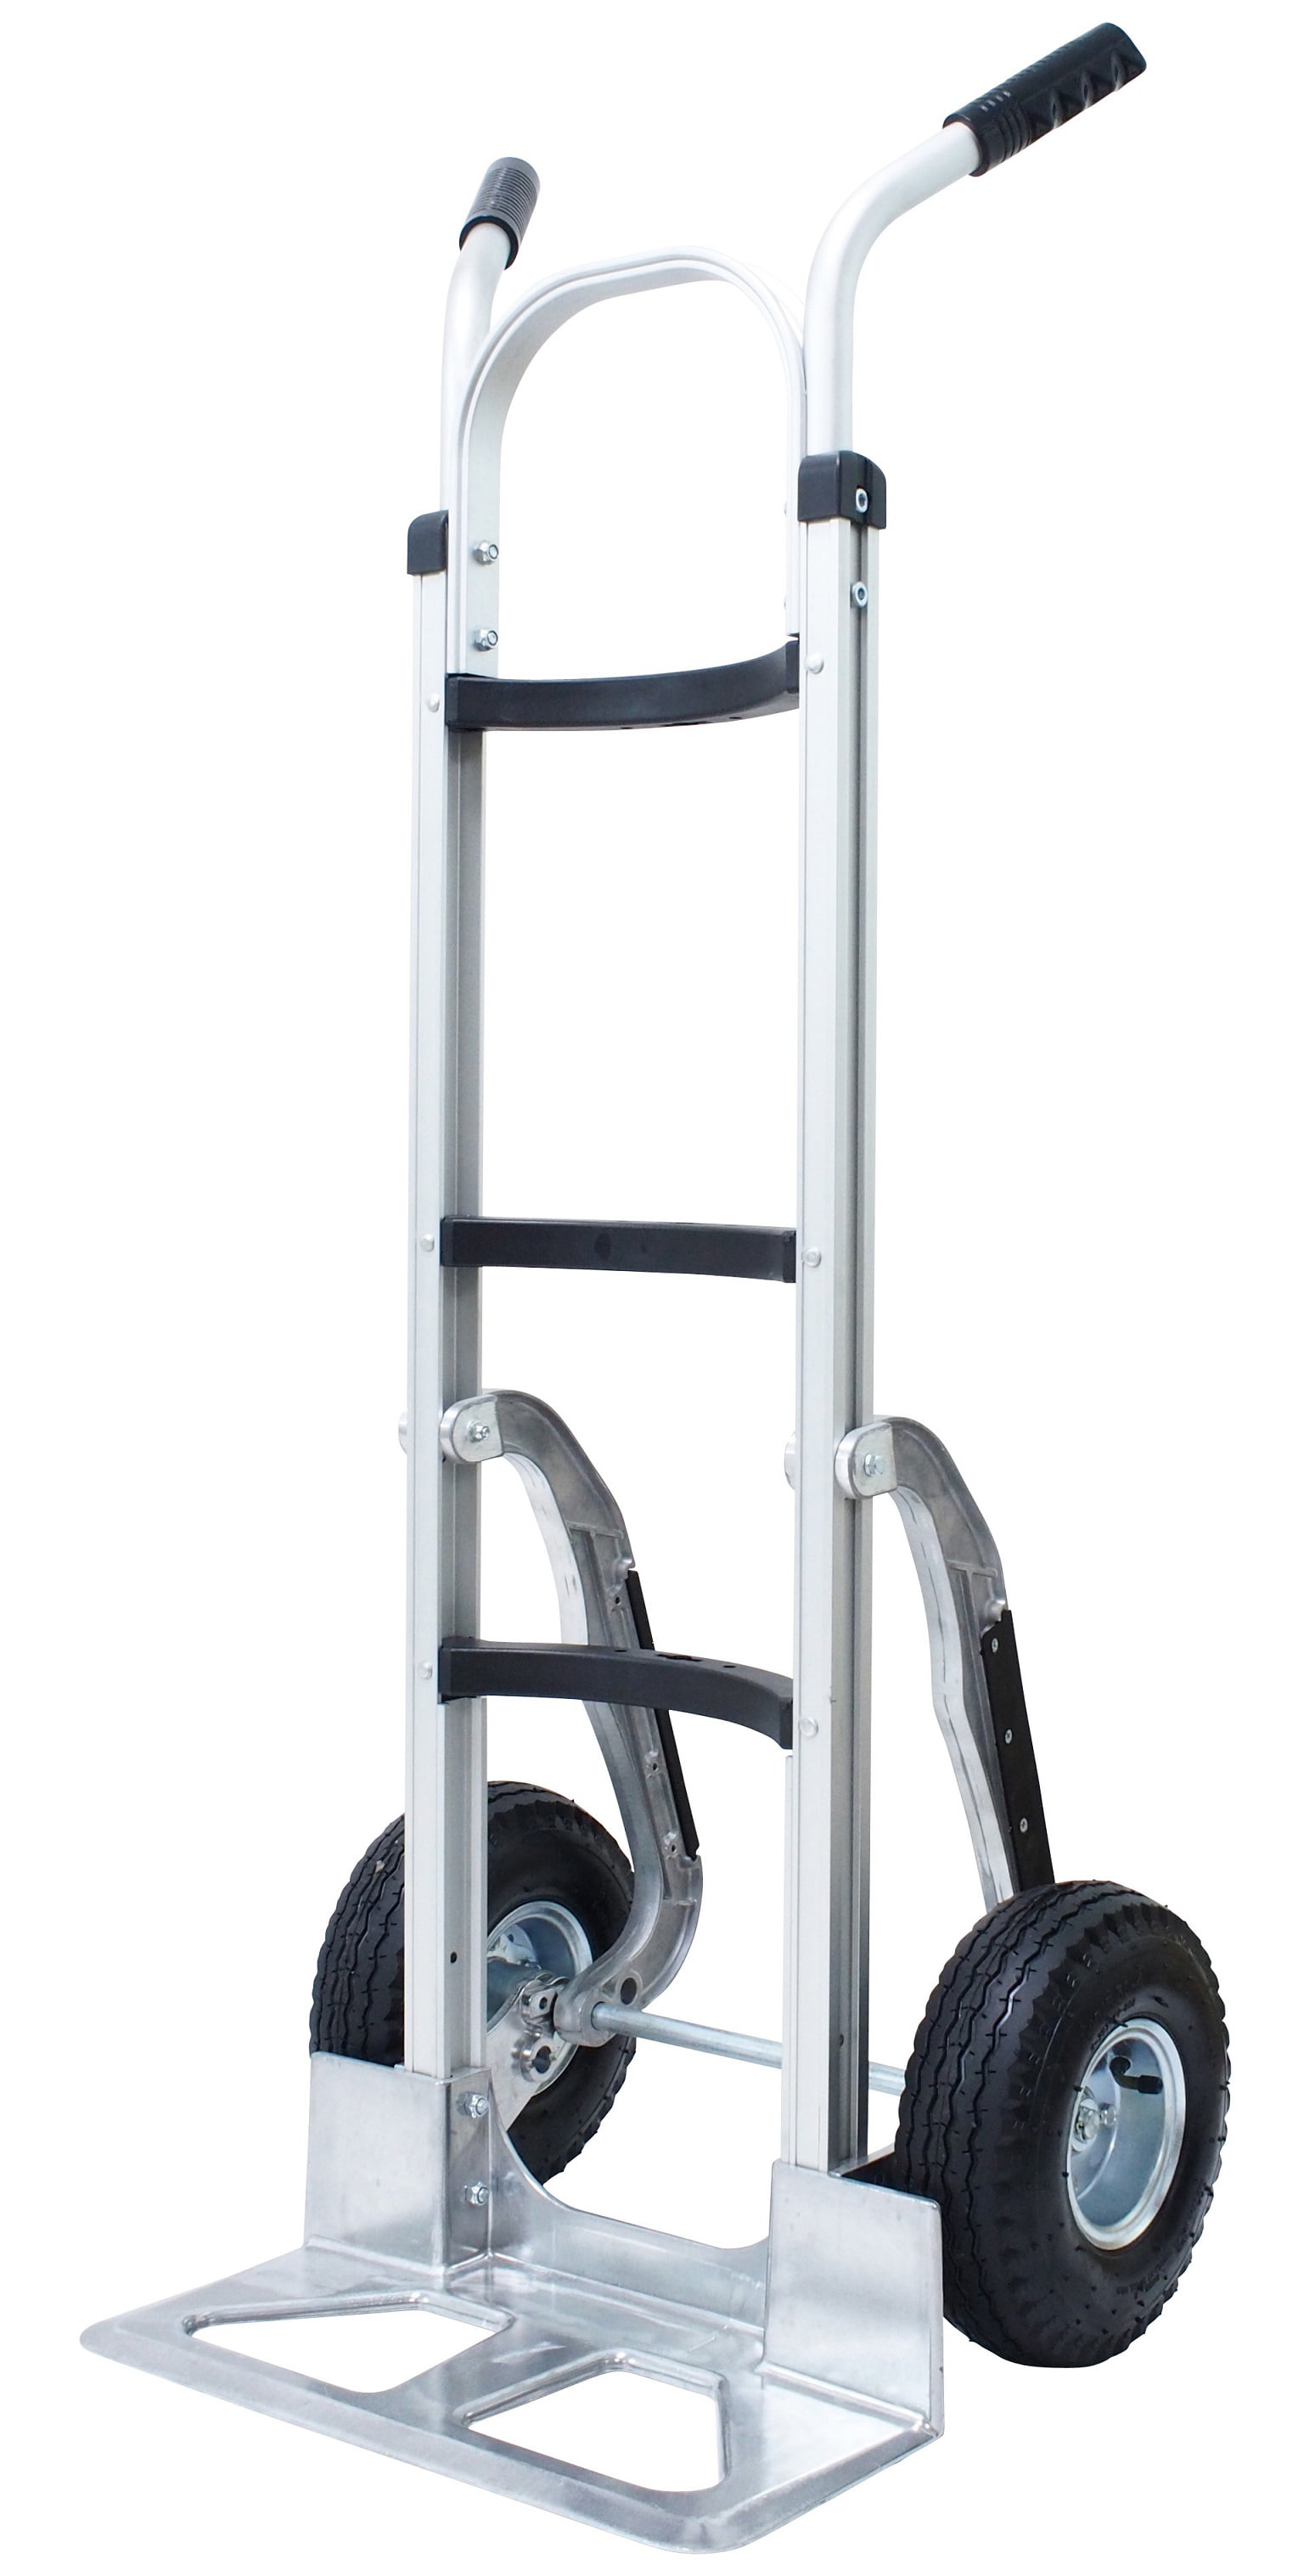 Tyke Supply Stair Climber Aluminum Hand Truck Commercial Quality 